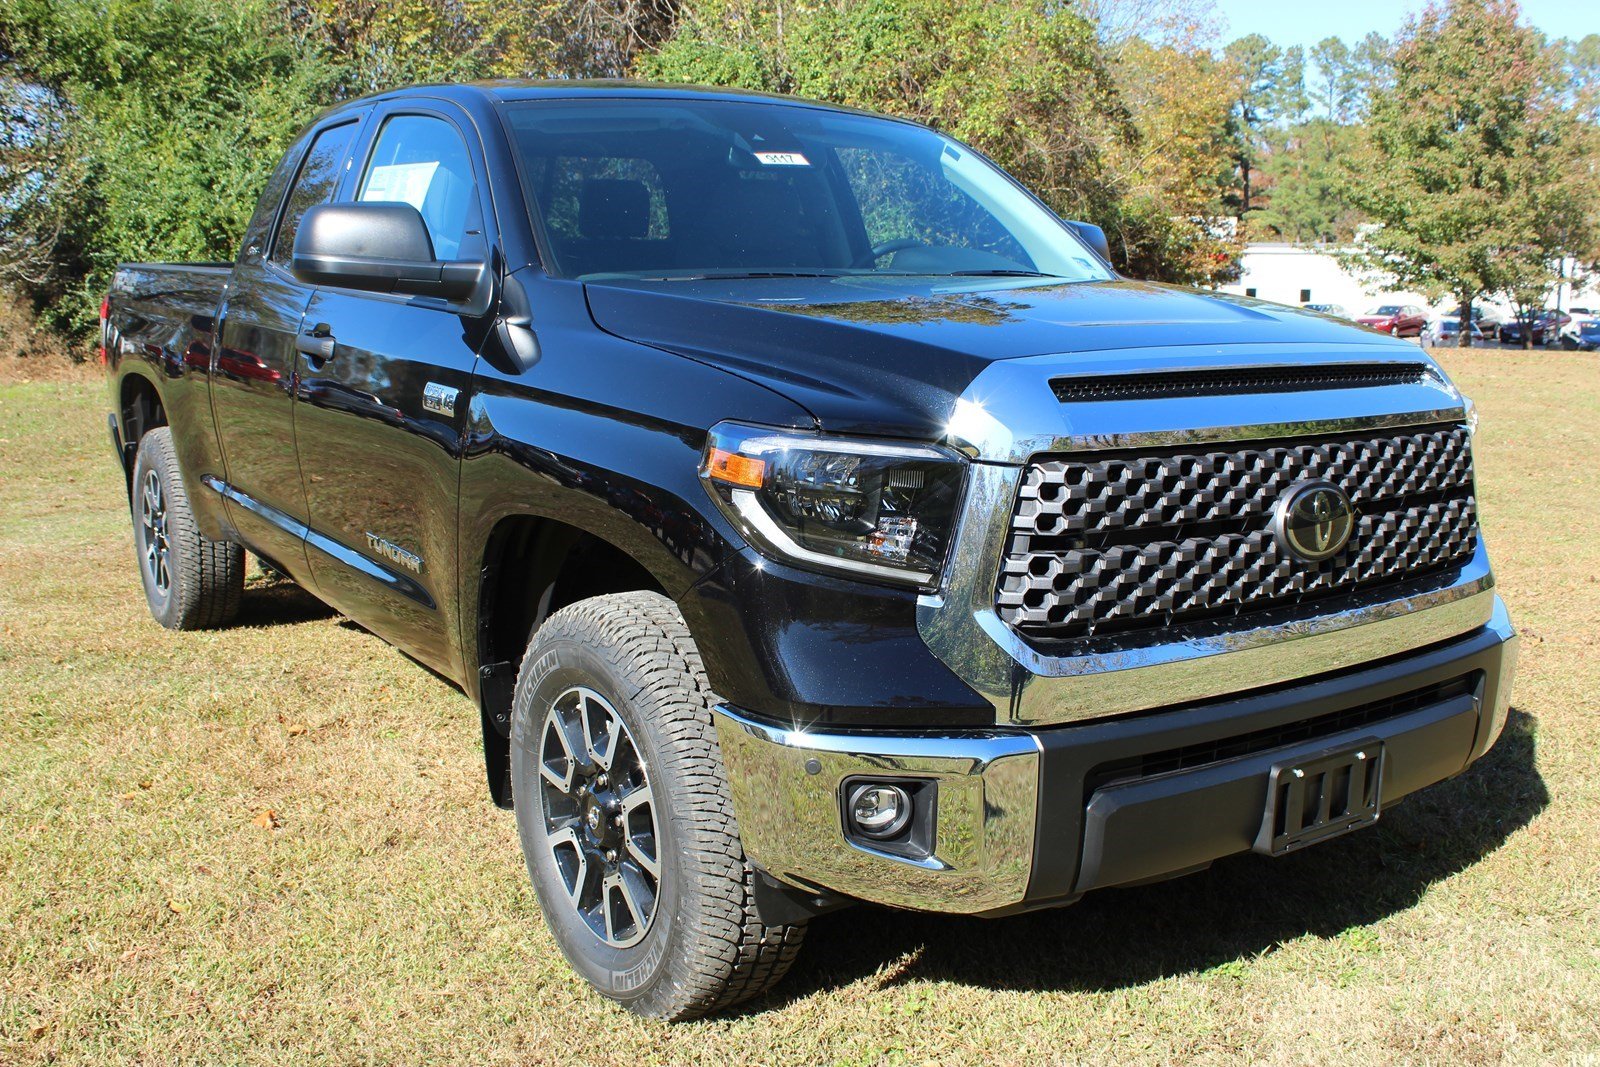 New 2020 Toyota Tundra 4WD SR5 Crew Cab Pickup in Gloucester #9117